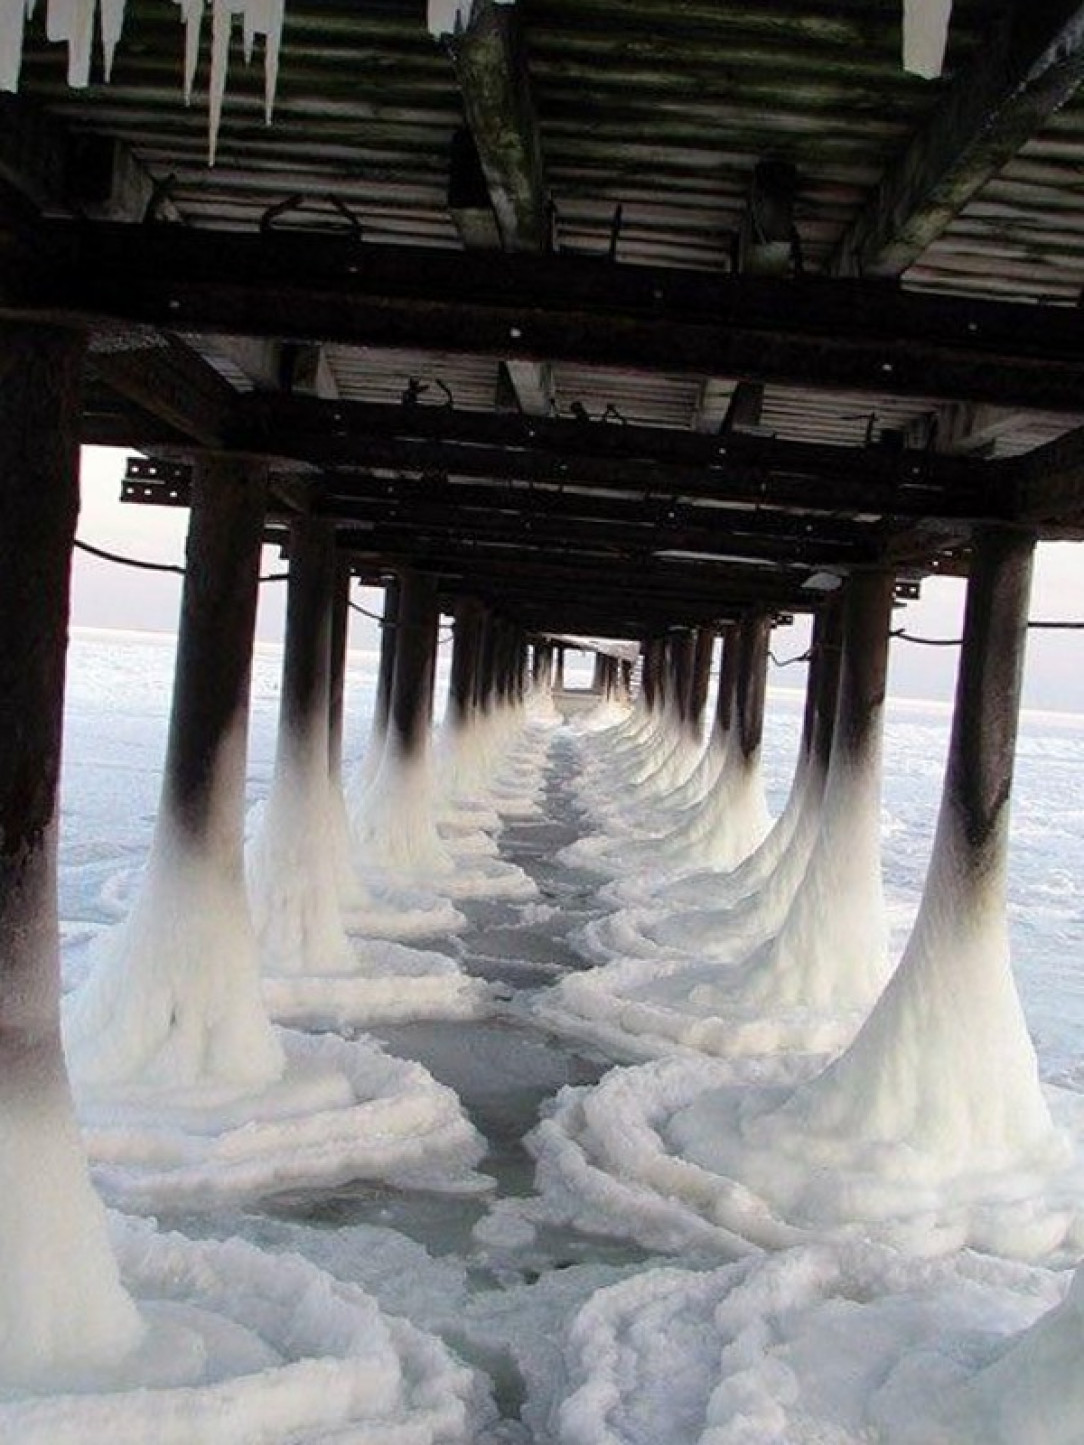 The way the ice forms under this pier